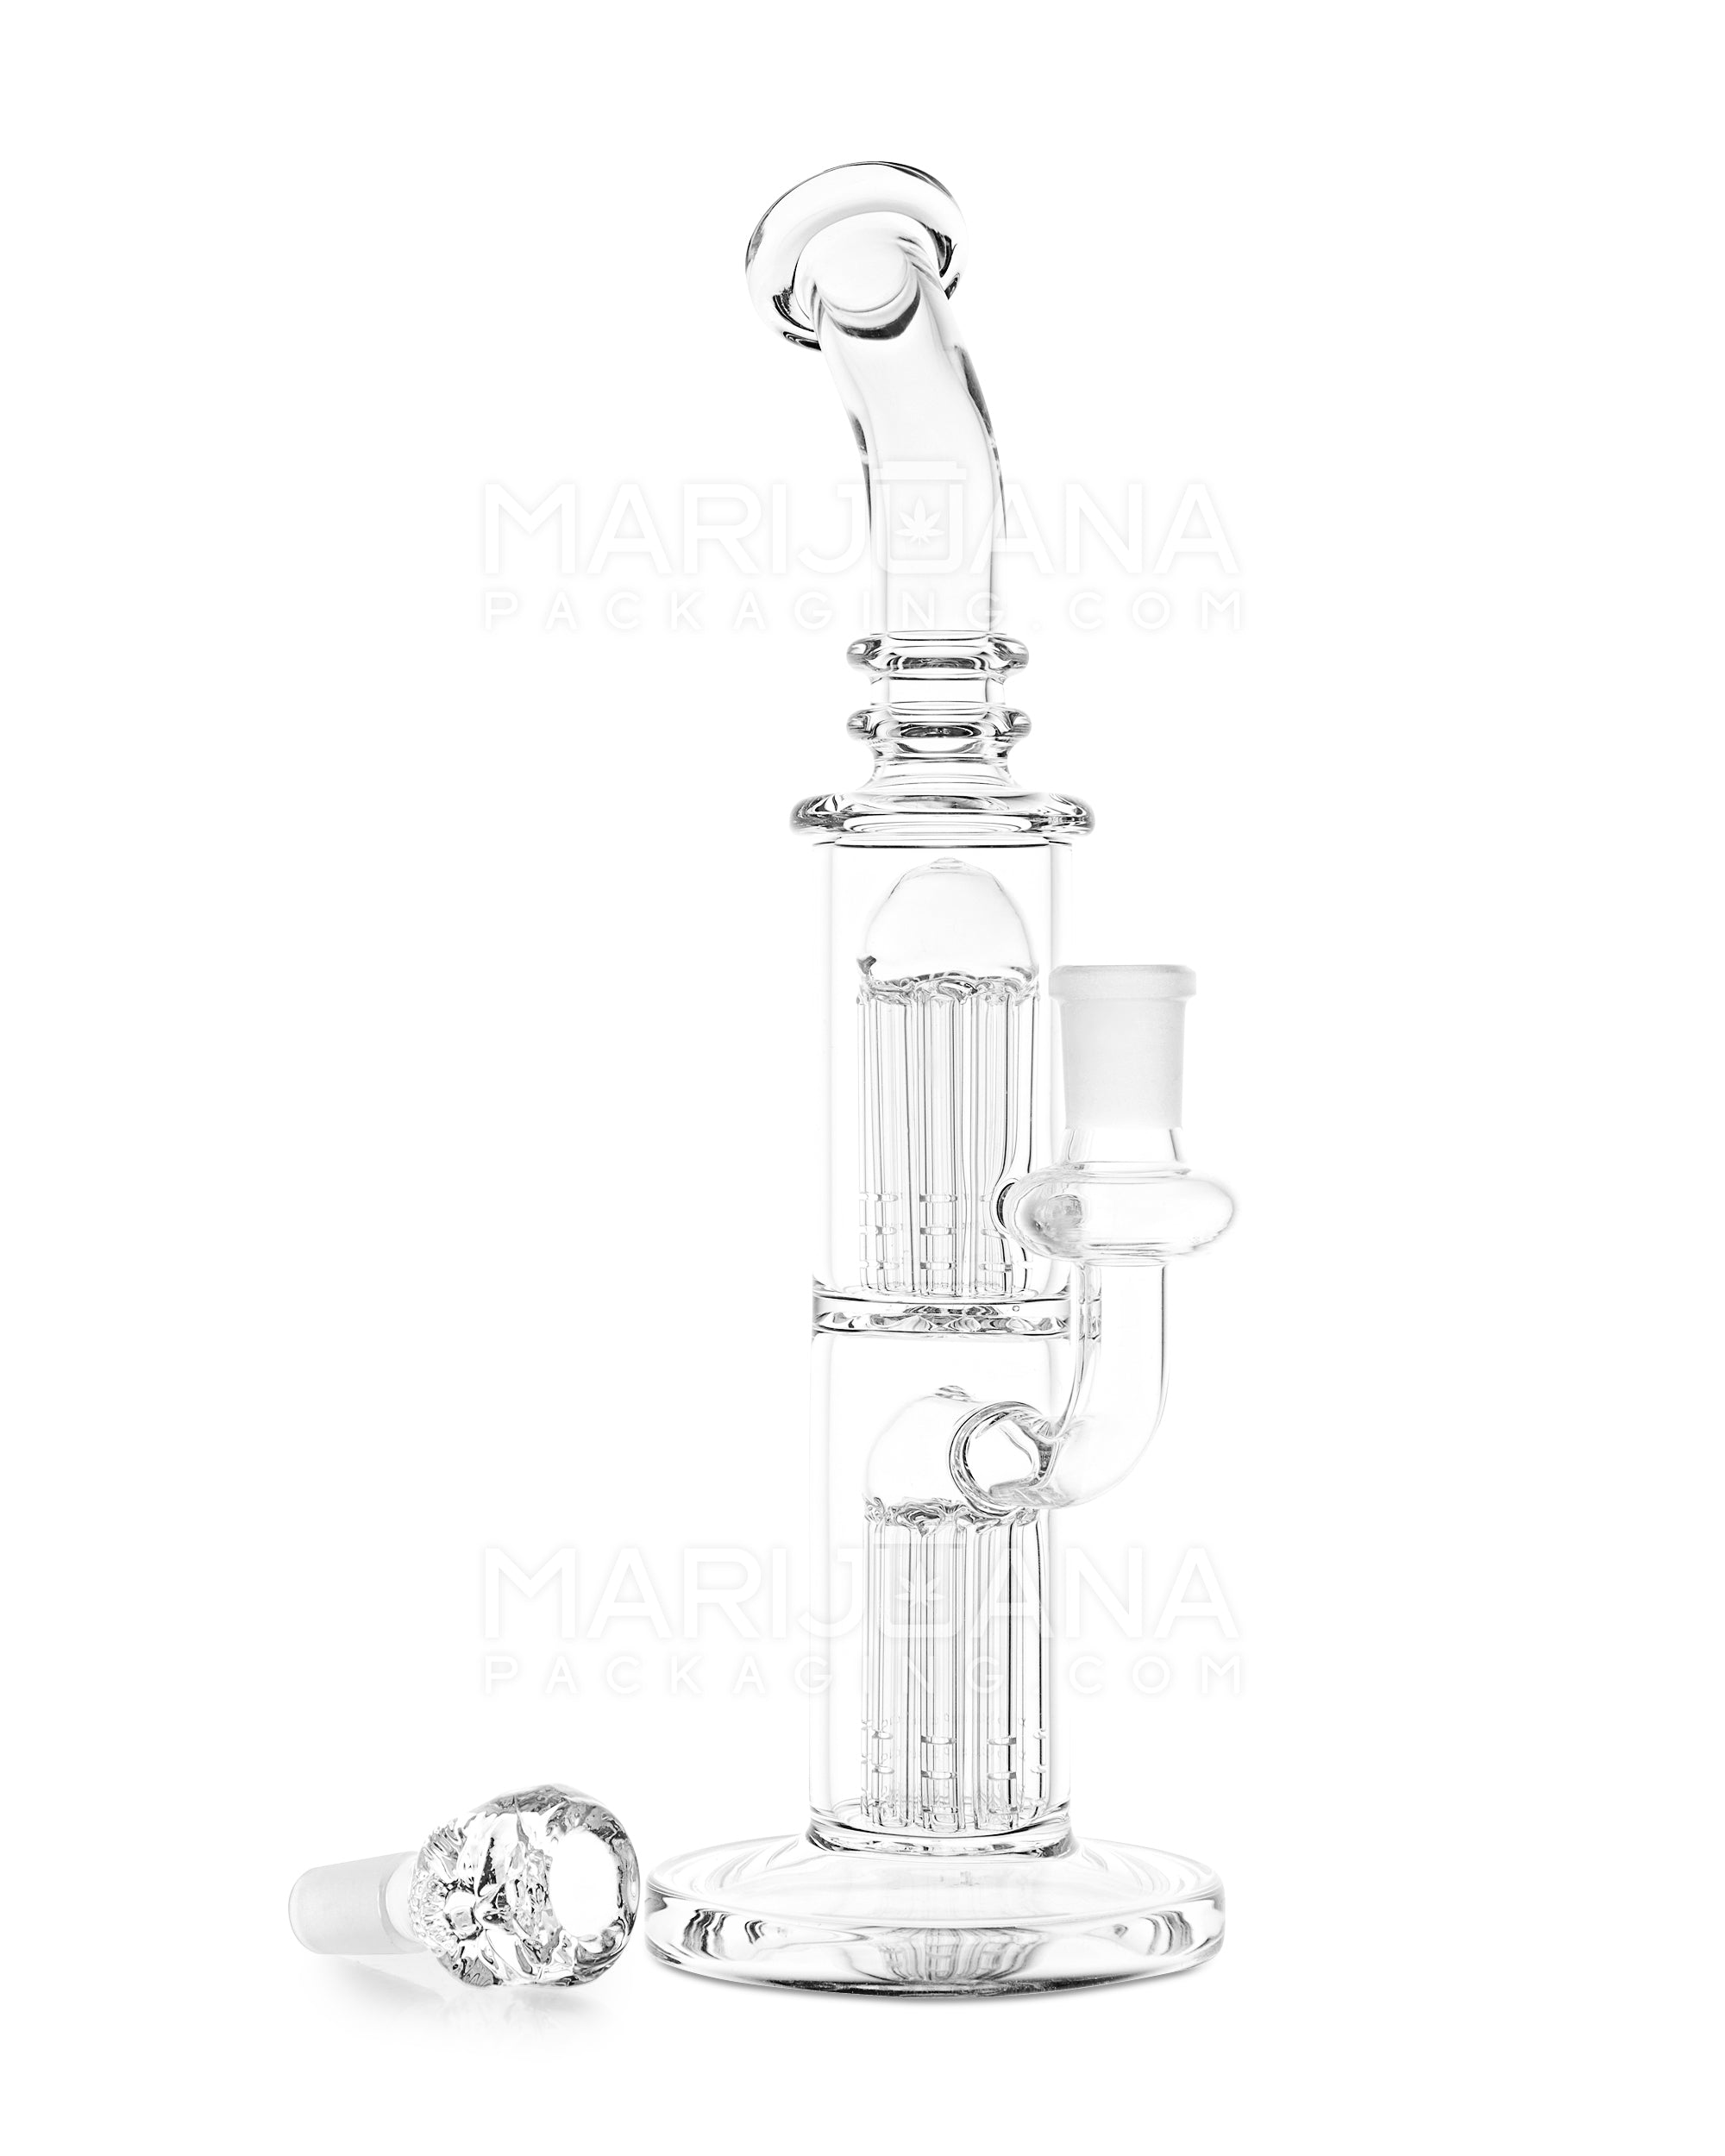 USA Glass | Bent Neck Double Tree Perc Water Pipe w/ Honeycomb Face Bowl | 10.5in Tall - 14mm Bowl - Clear